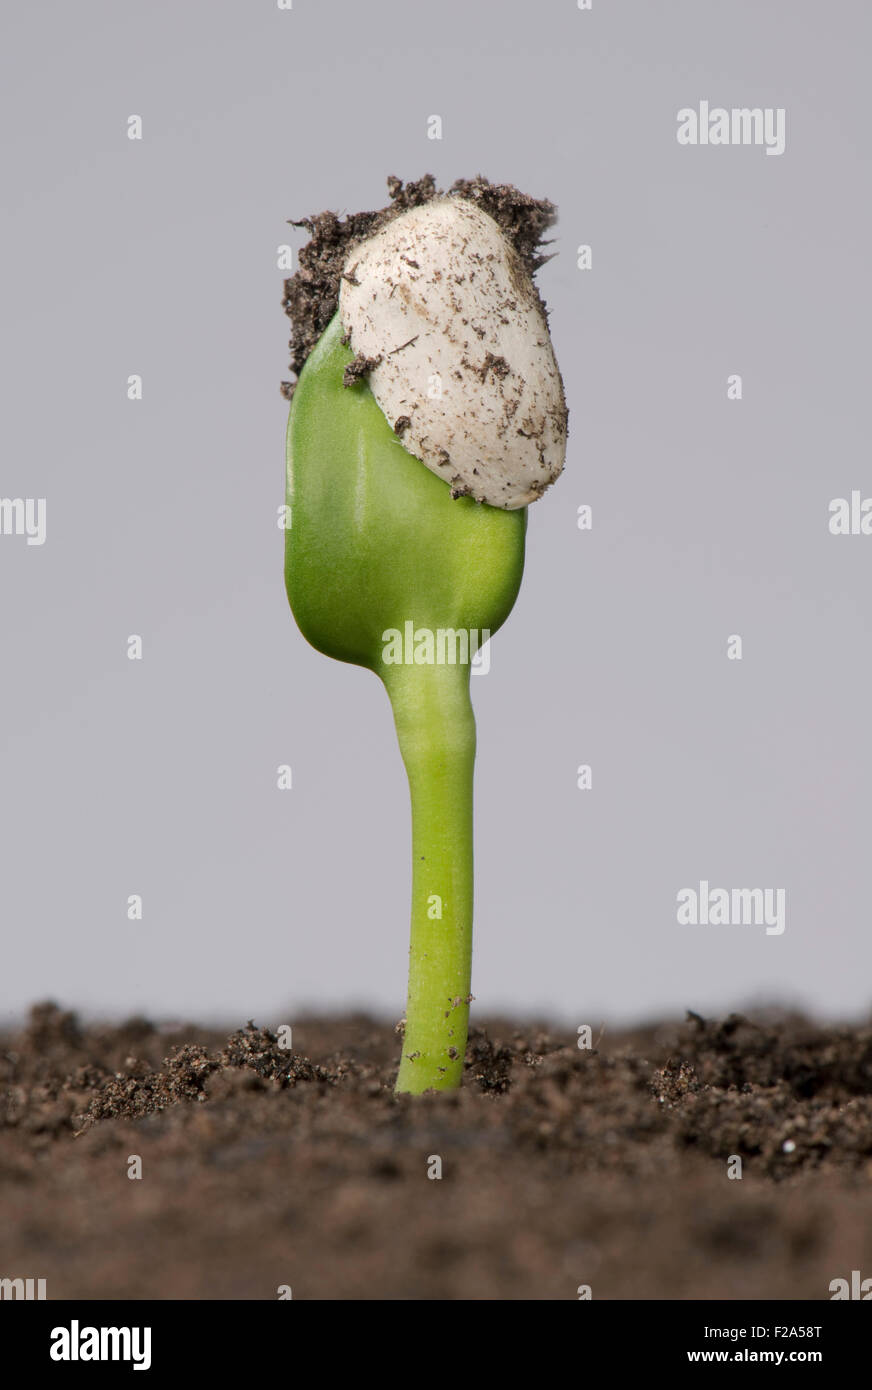 Sunflower seedling with cotyledons still trapped inside the seed coat or pericarp after germination Stock Photo